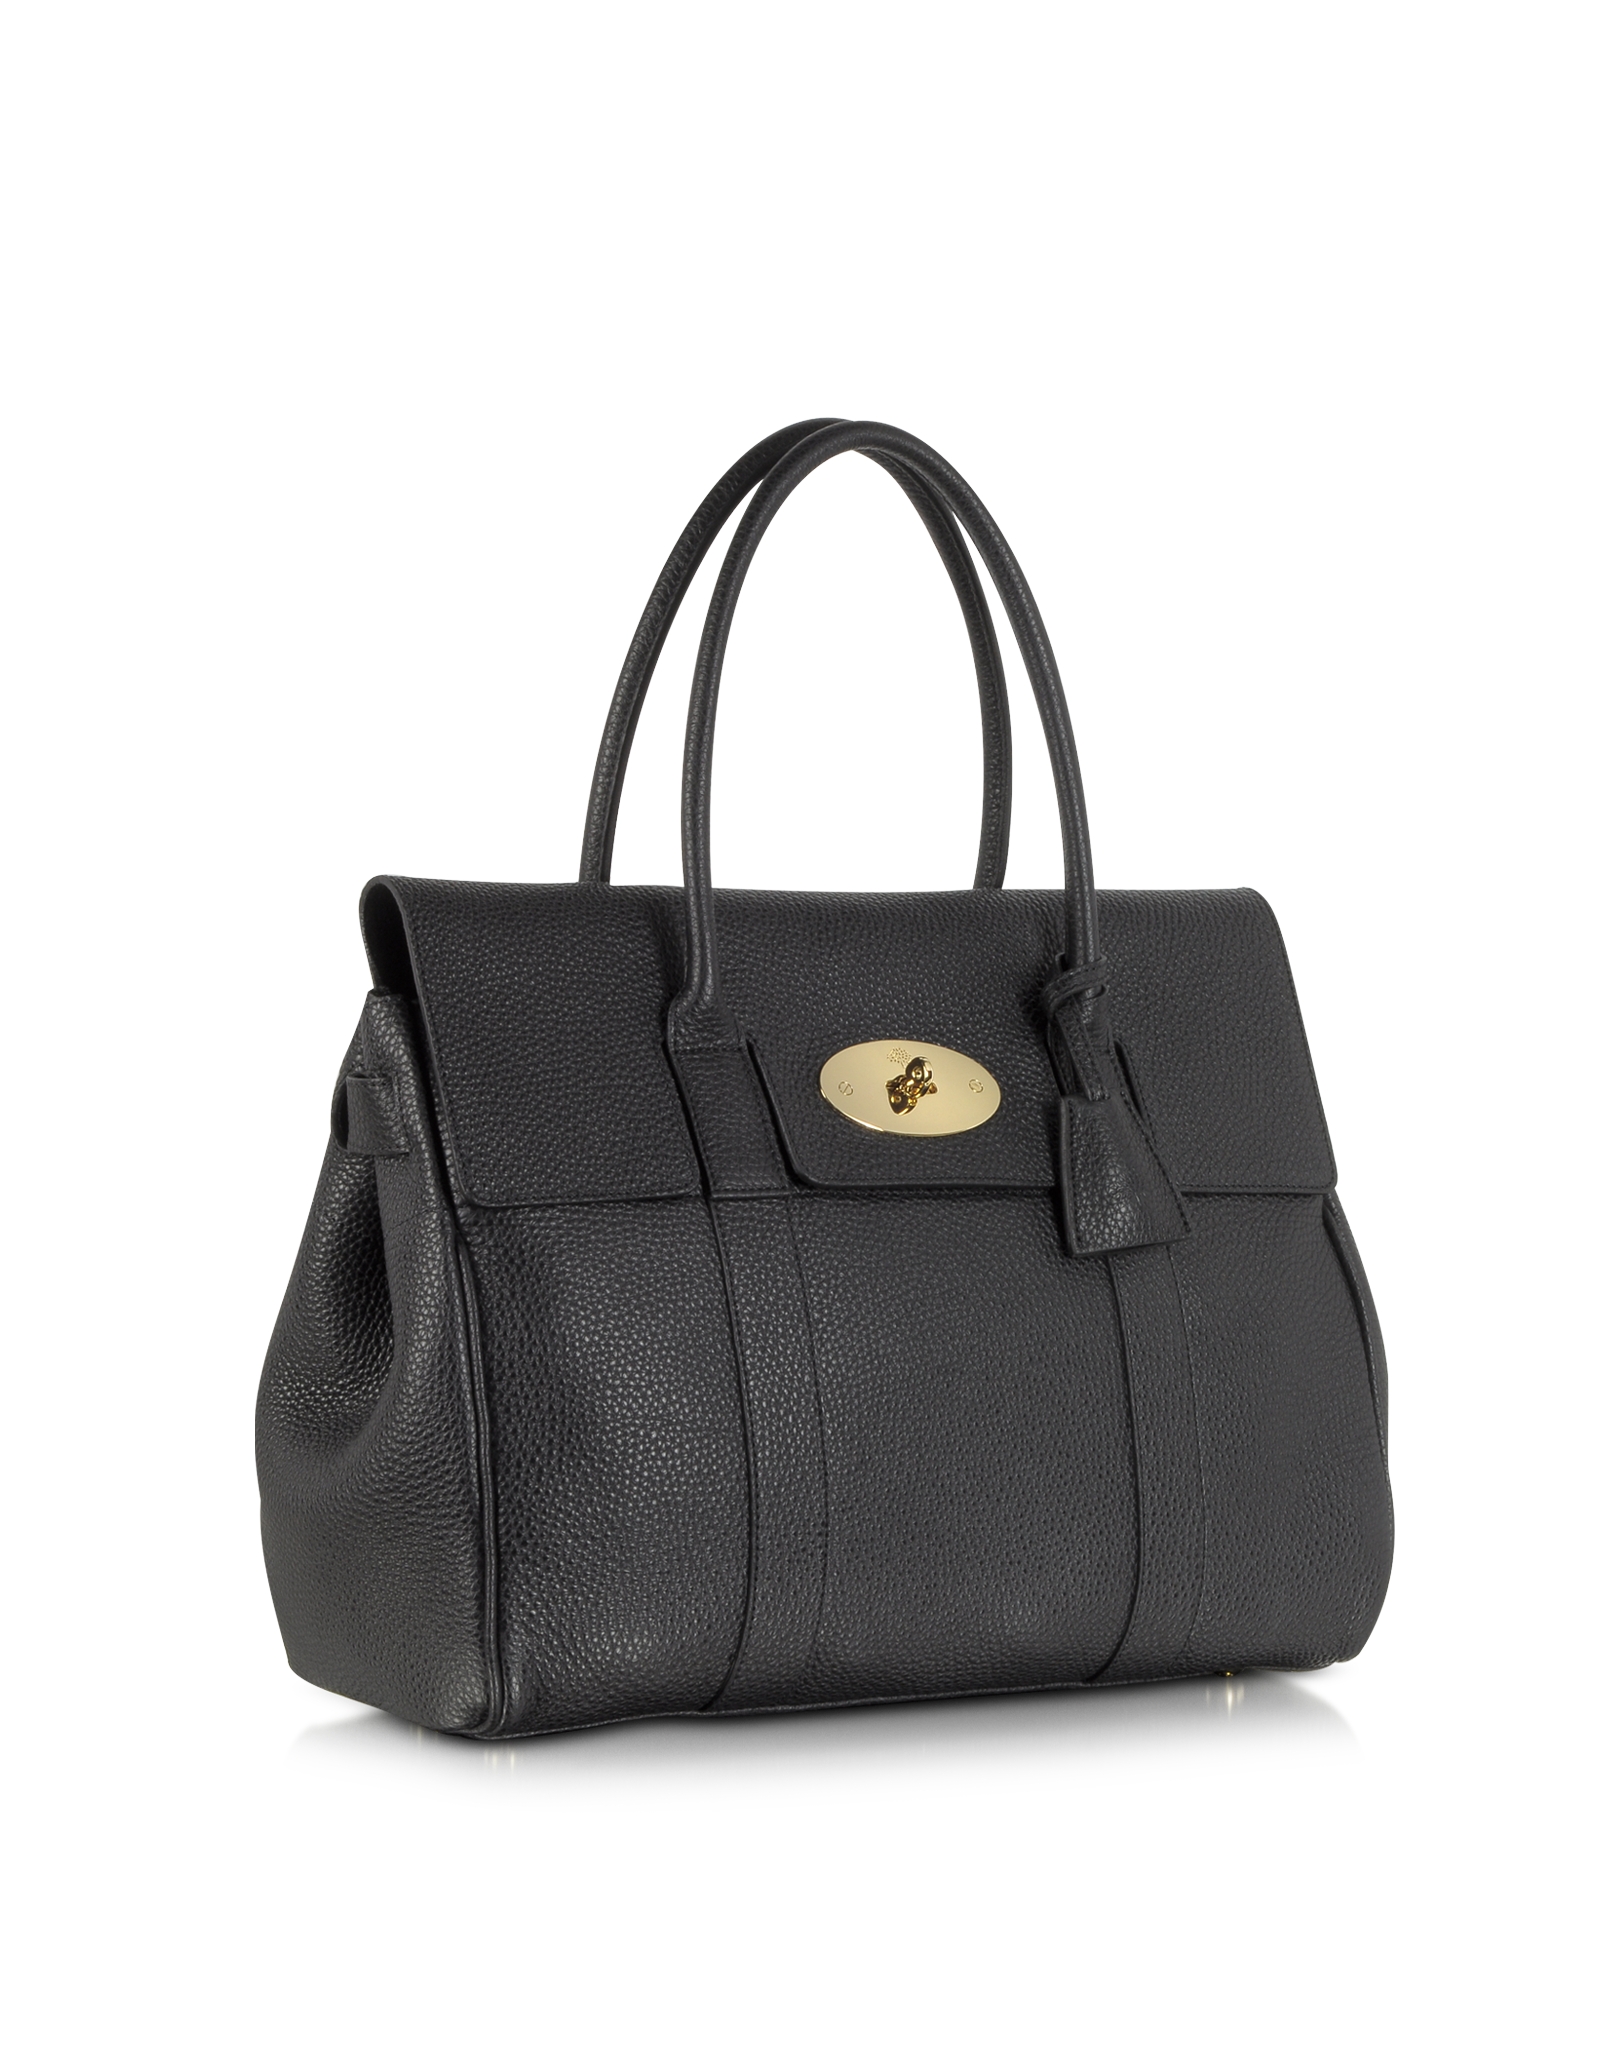 Mulberry Bayswater Black Grain Leather Tote Bag in Black | Lyst